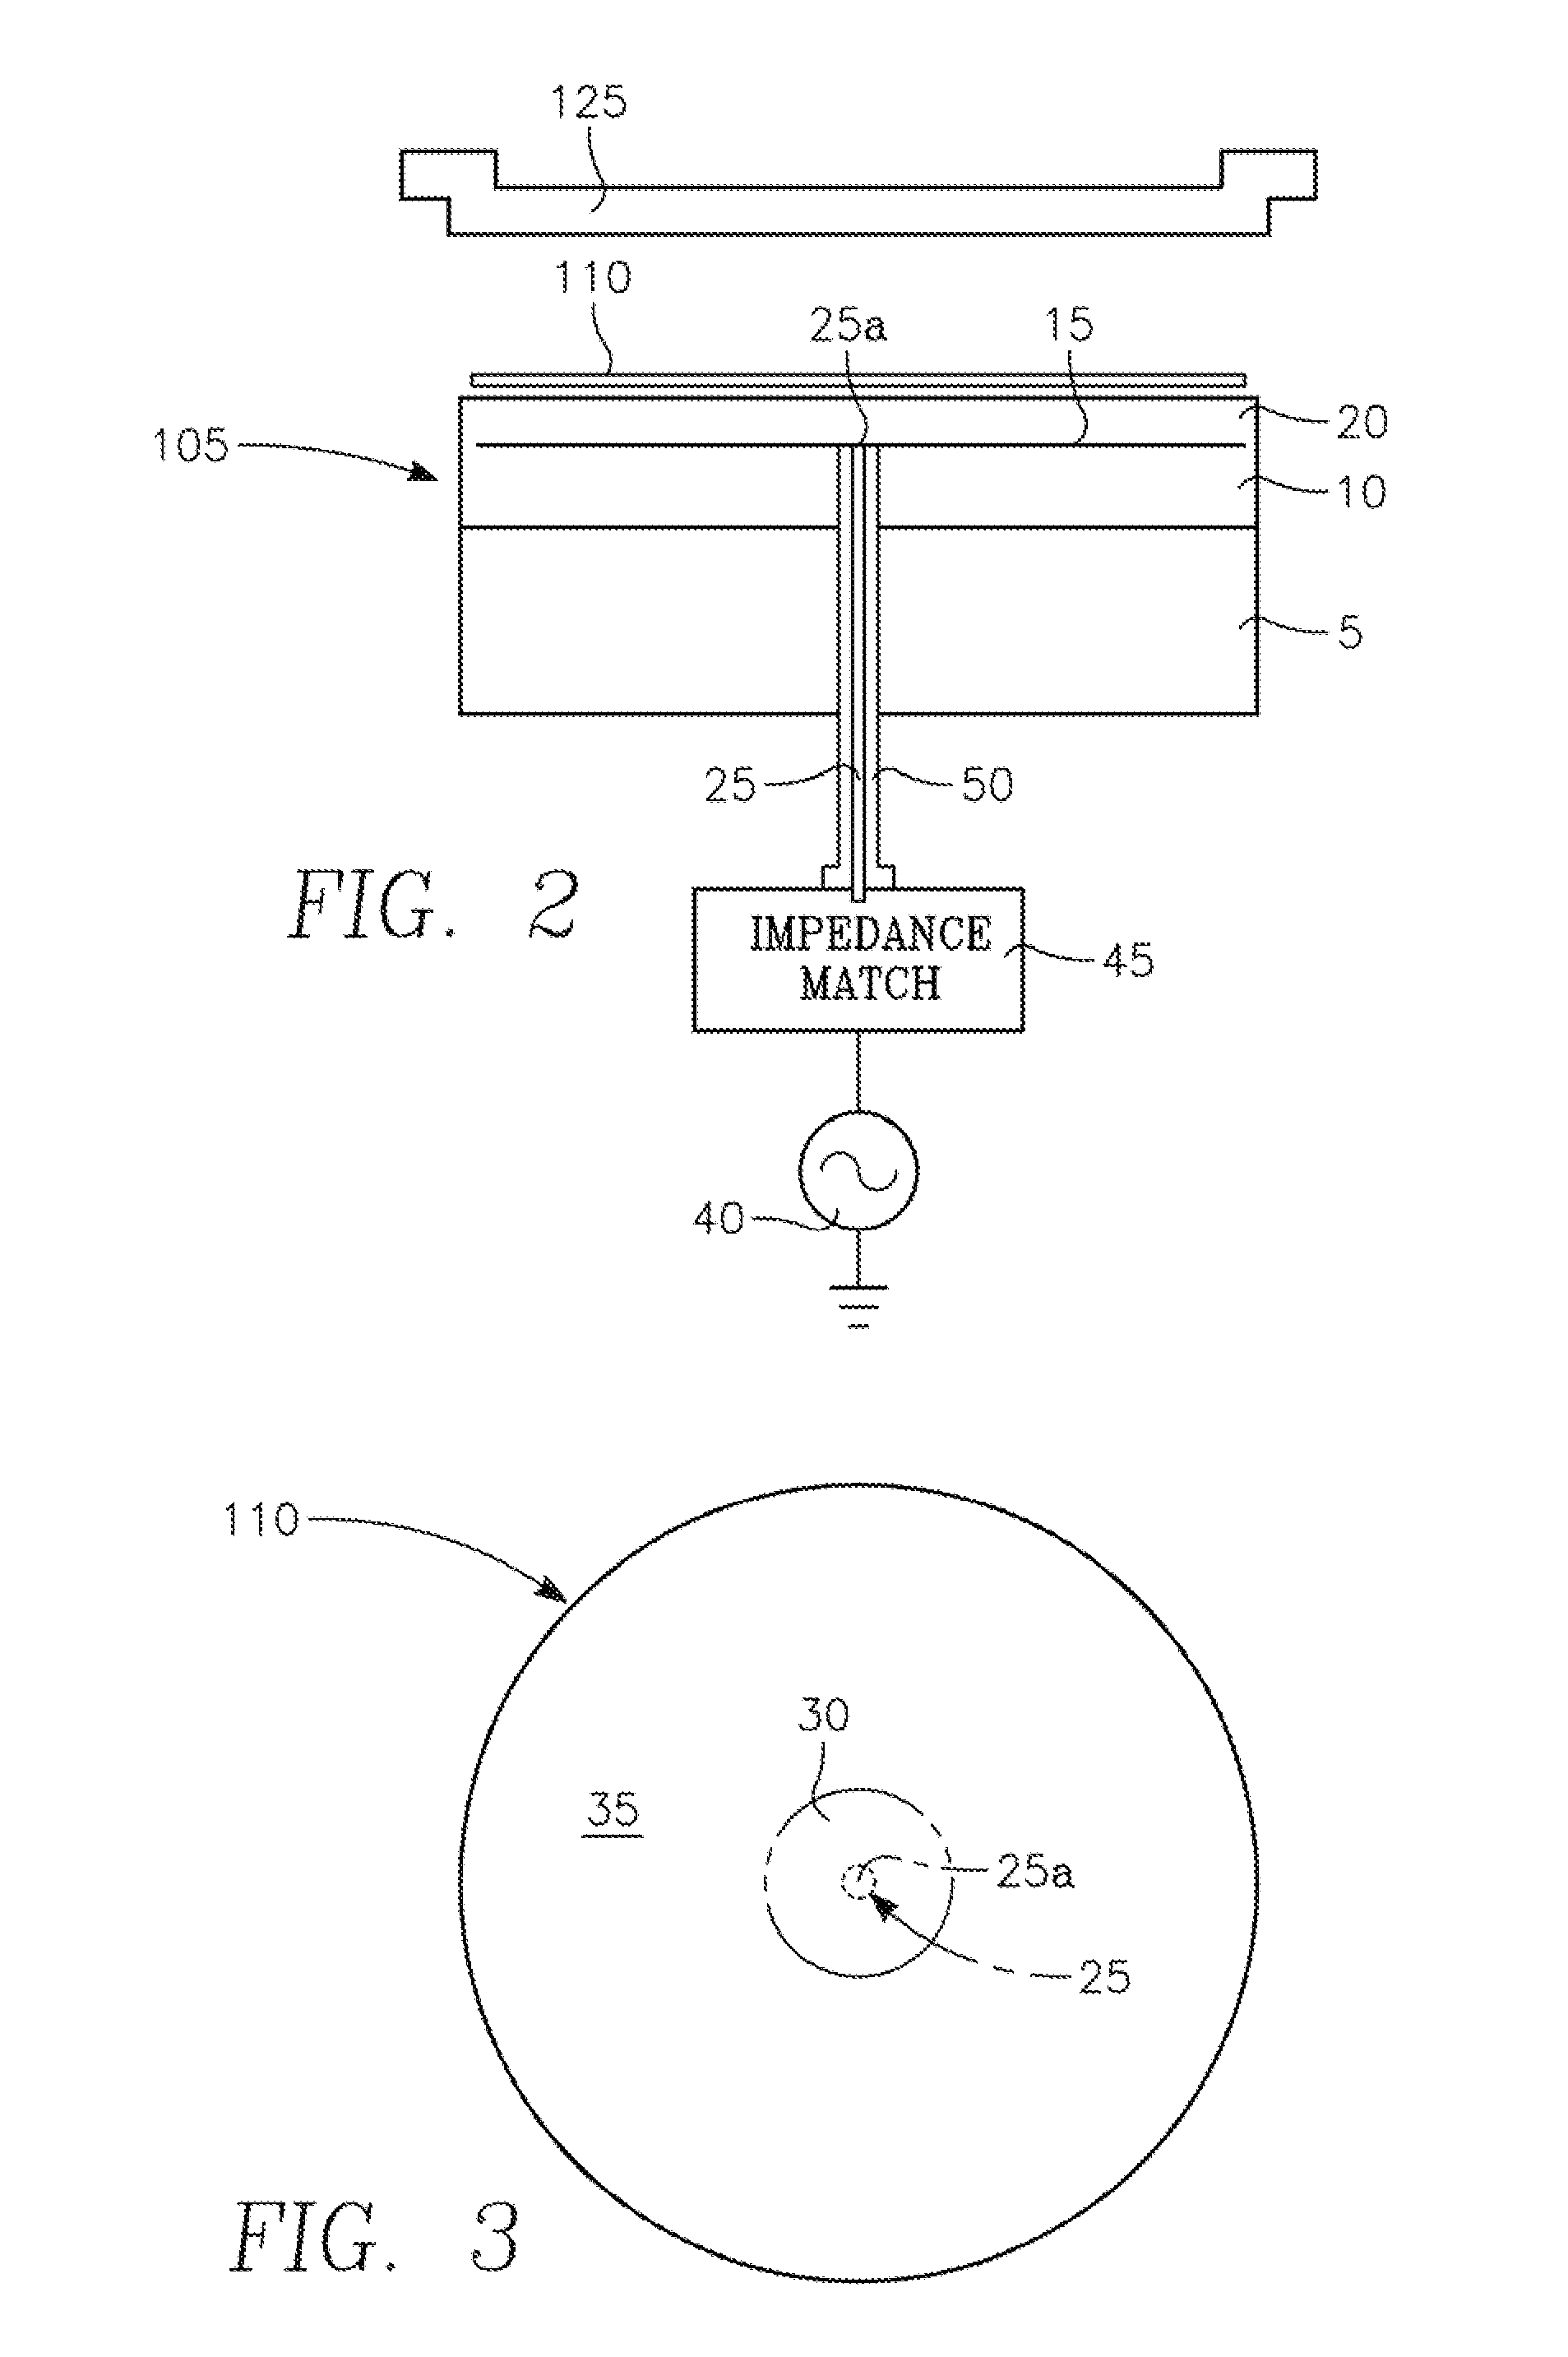 Capacitively coupled plasma reactor having very agile wafer temperature control